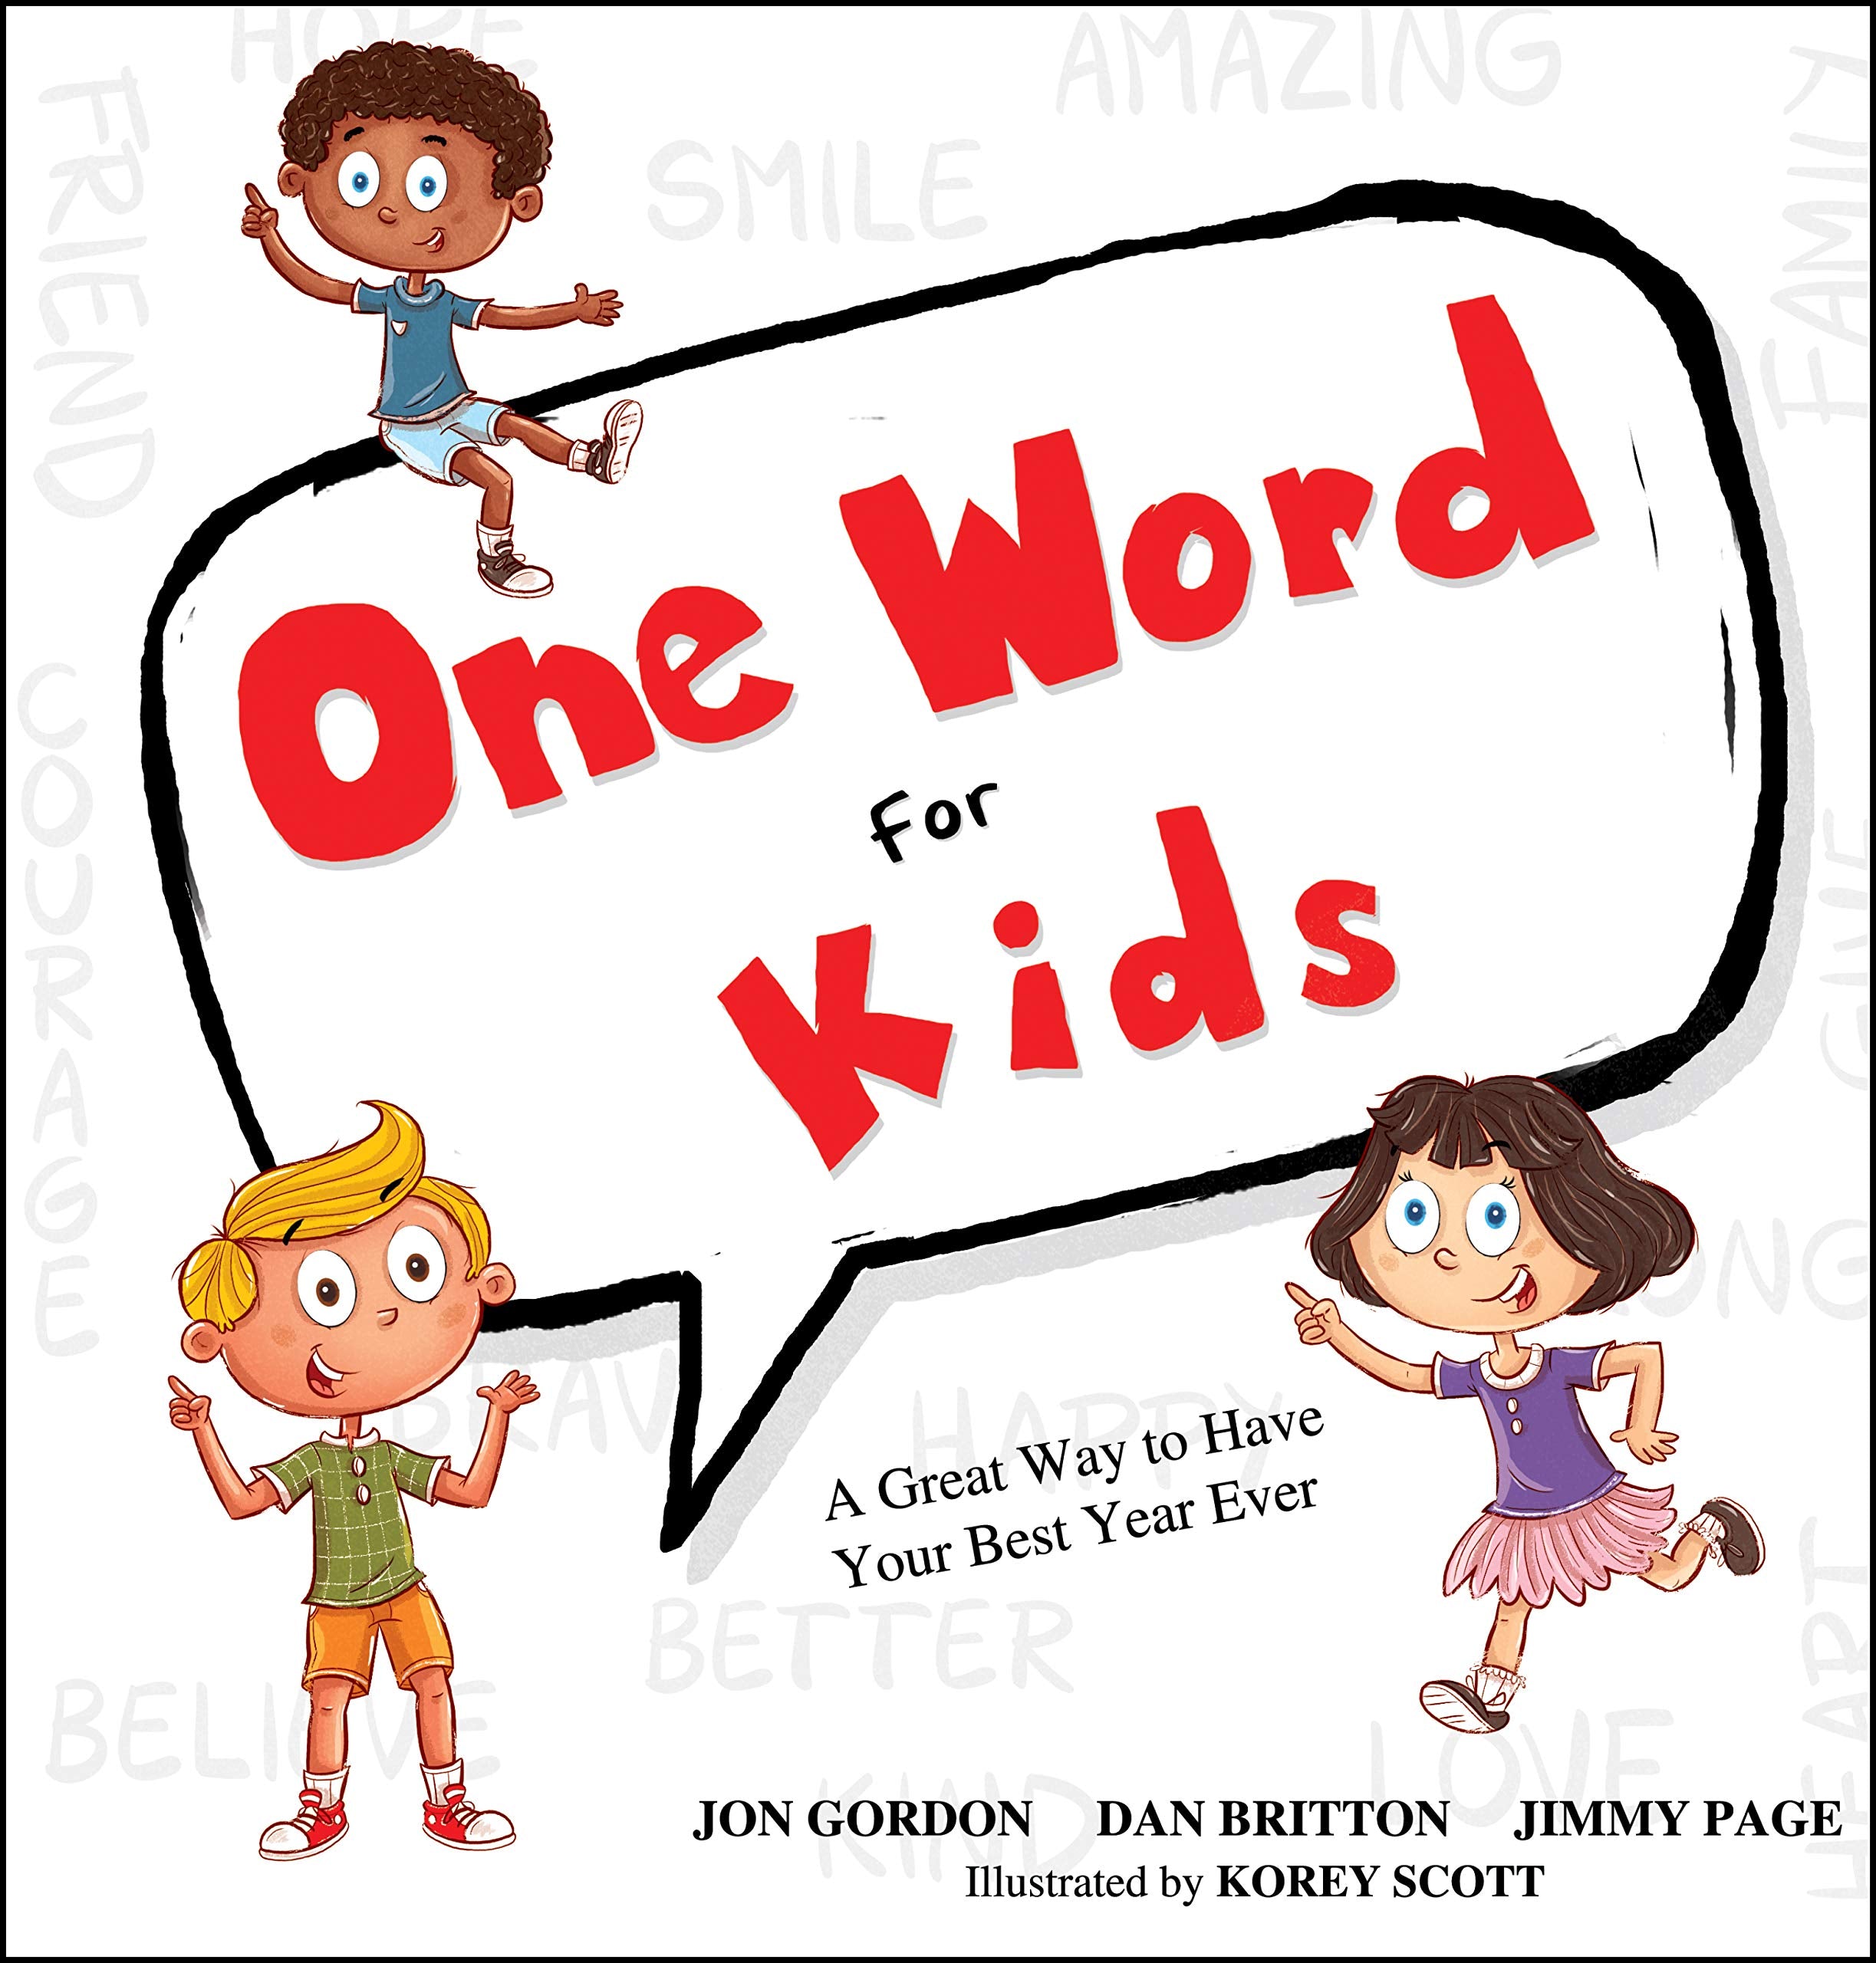 One Word for Kids: A Great Way to Have Your Best Year Ever (Jon Gordon) - 6490